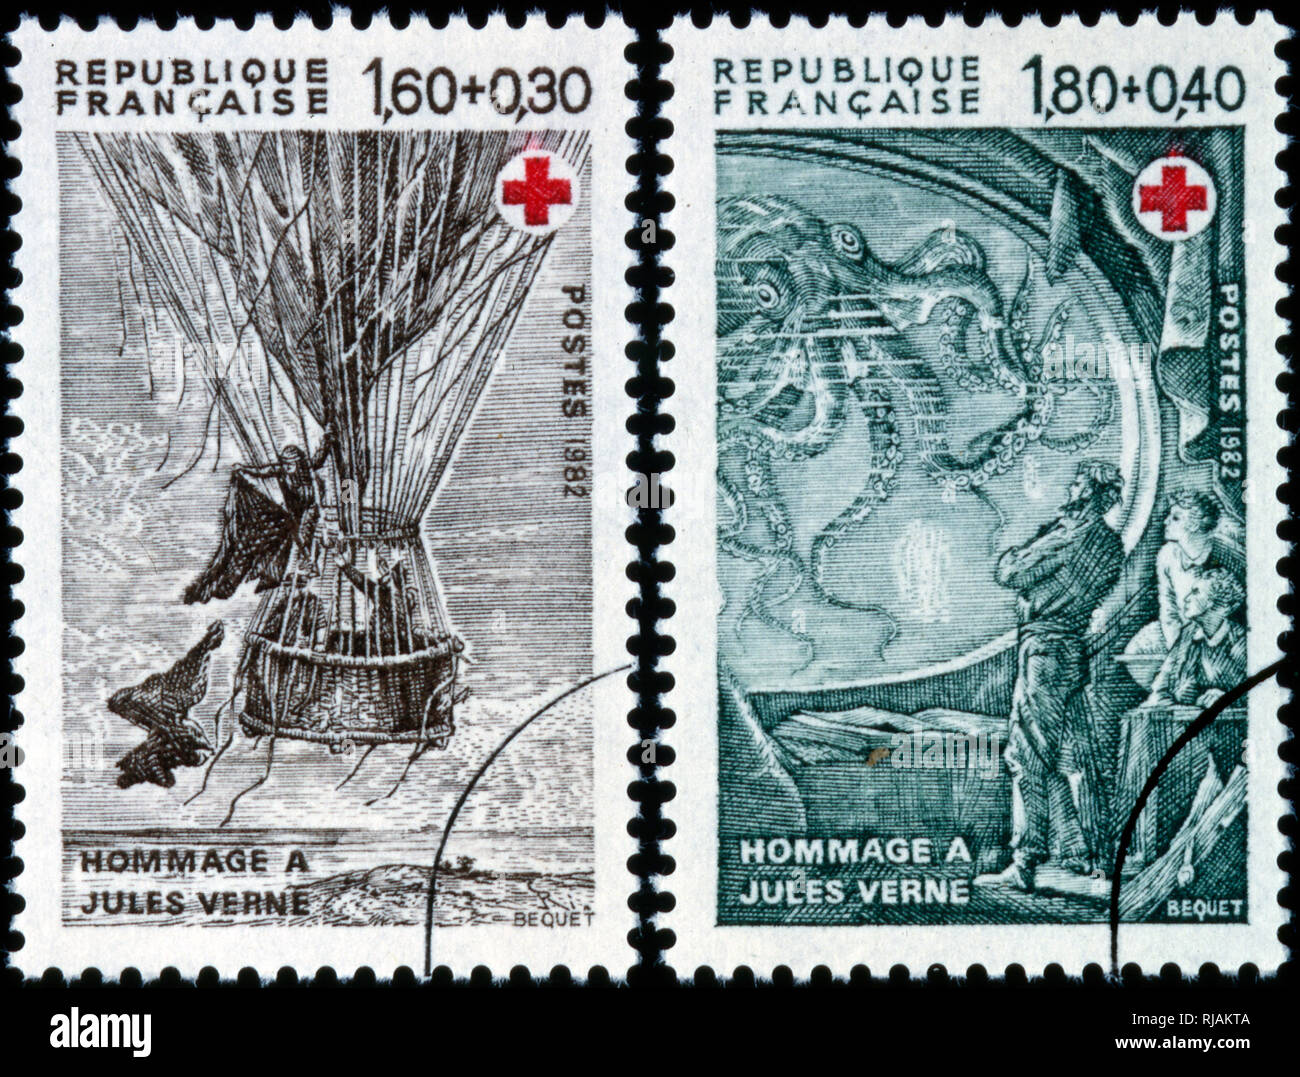 French postage stamp depicting illustrations from books by Jules Verne. 1982 Stock Photo